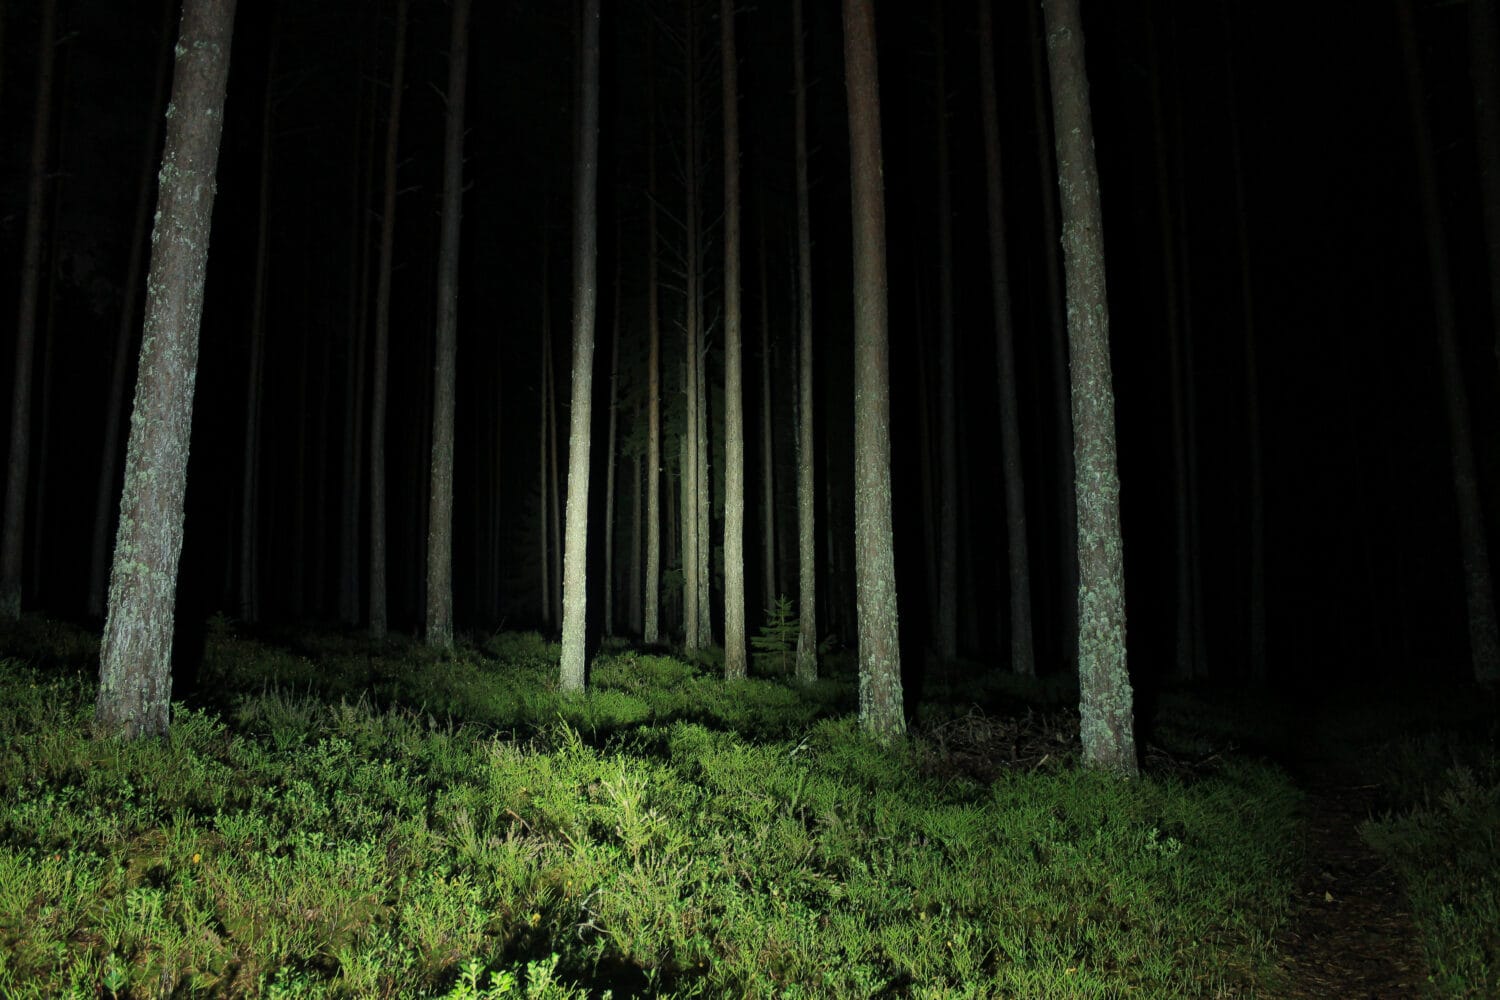 Torch lighted forest at night. Pine forest with green ground. An uncomfortable atmosphere and fear of the unknown and darkness. Day of the dead in dark. Halloween mood in a place where people get lost